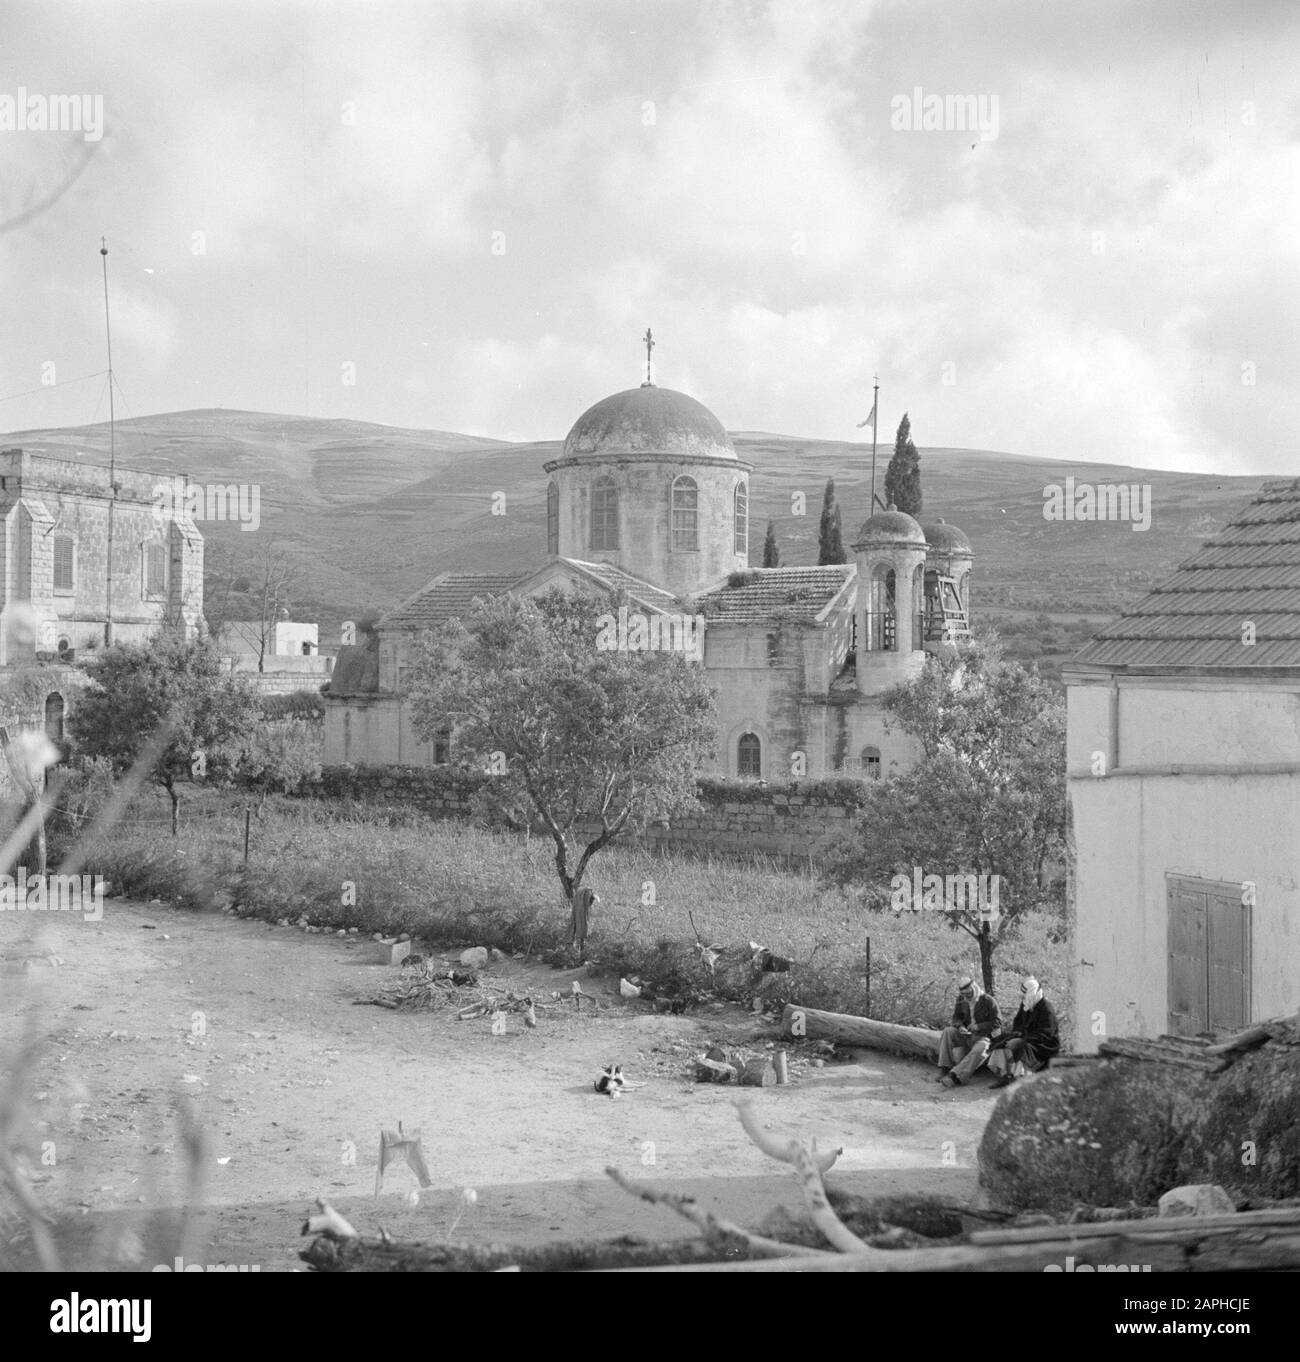 Israel 1948-1949: Kana Description: The Greek Orthodox Wedding Church, with in the foreground two villagers surrounded by scurrying chickens Date: 1948 Location: Israel, Cana Keywords: village statues, church buildings, chickens, towers Stock Photo